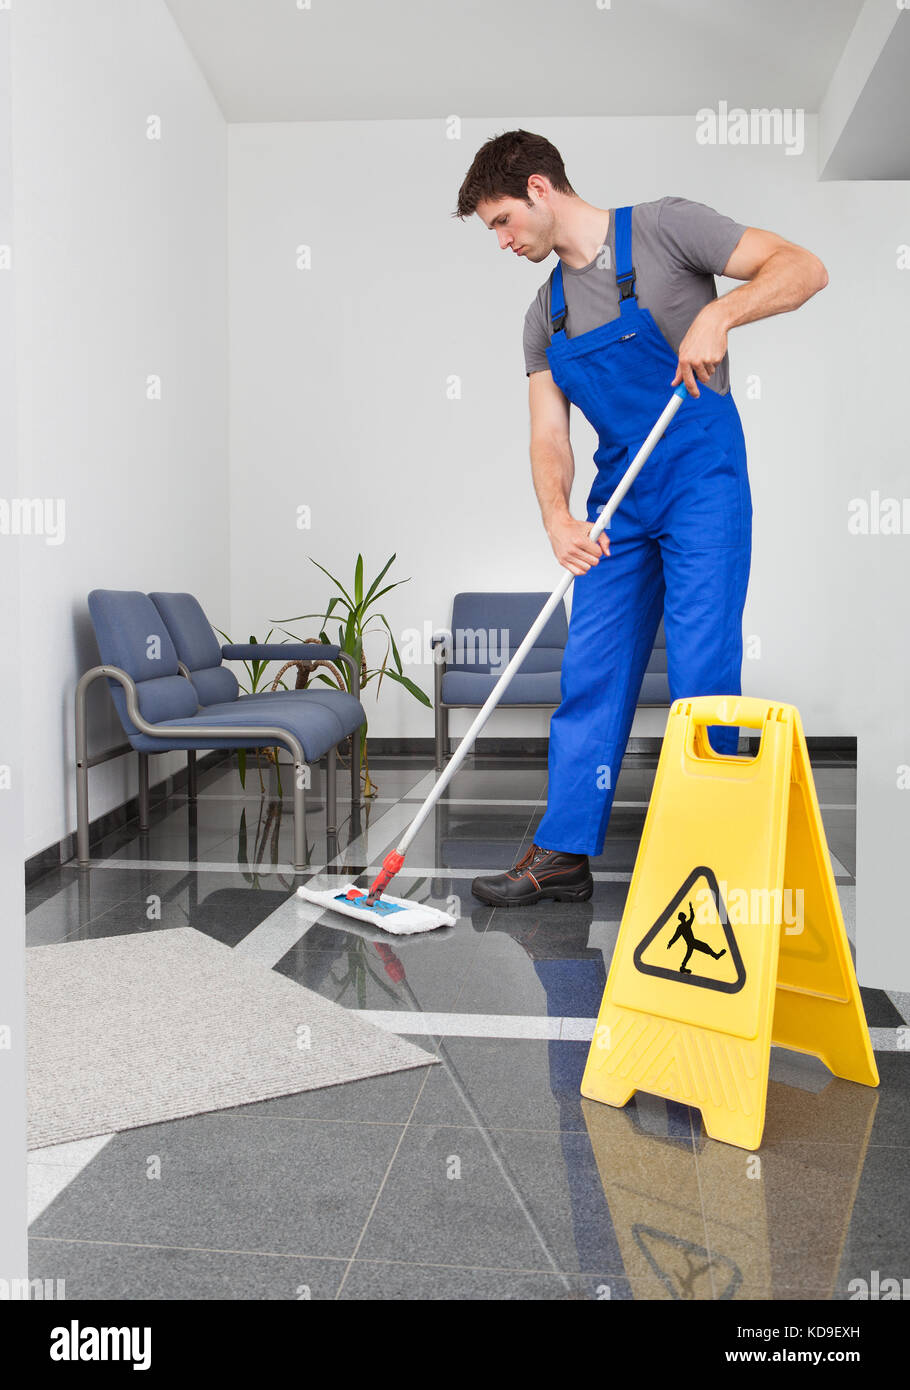 Portrait Of Young Man Cleaning The Floor With Mop In Office Stock Photo -  Alamy